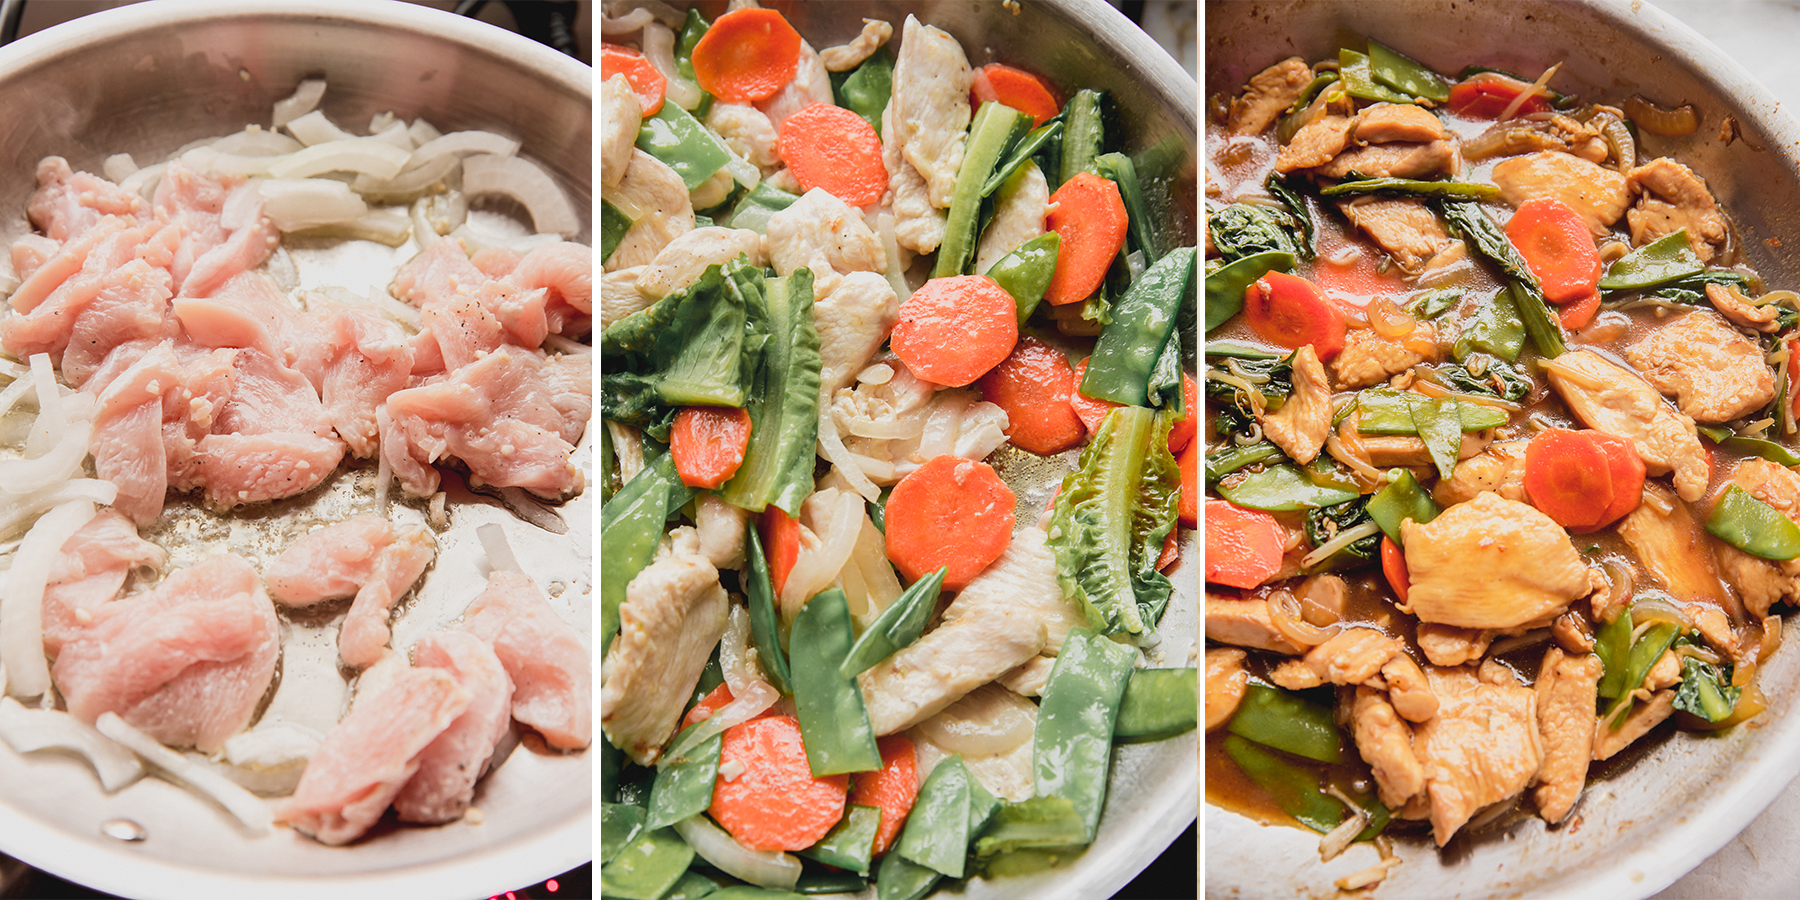 Step by step photos of cooking the chop suey.